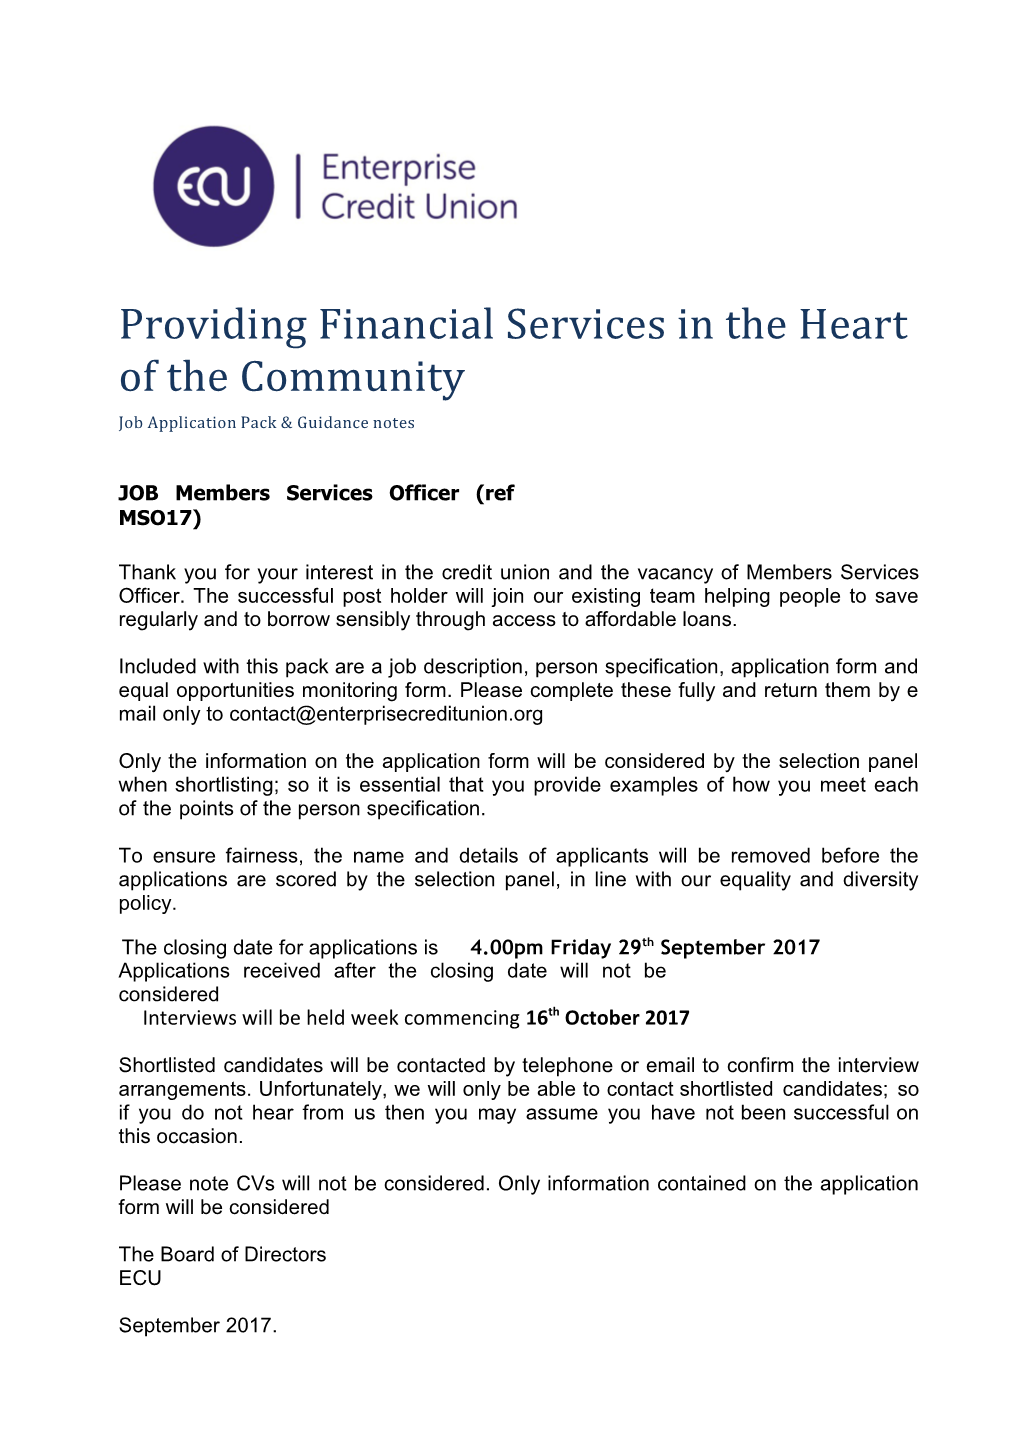 Providing Financial Services in the Heart of the Community